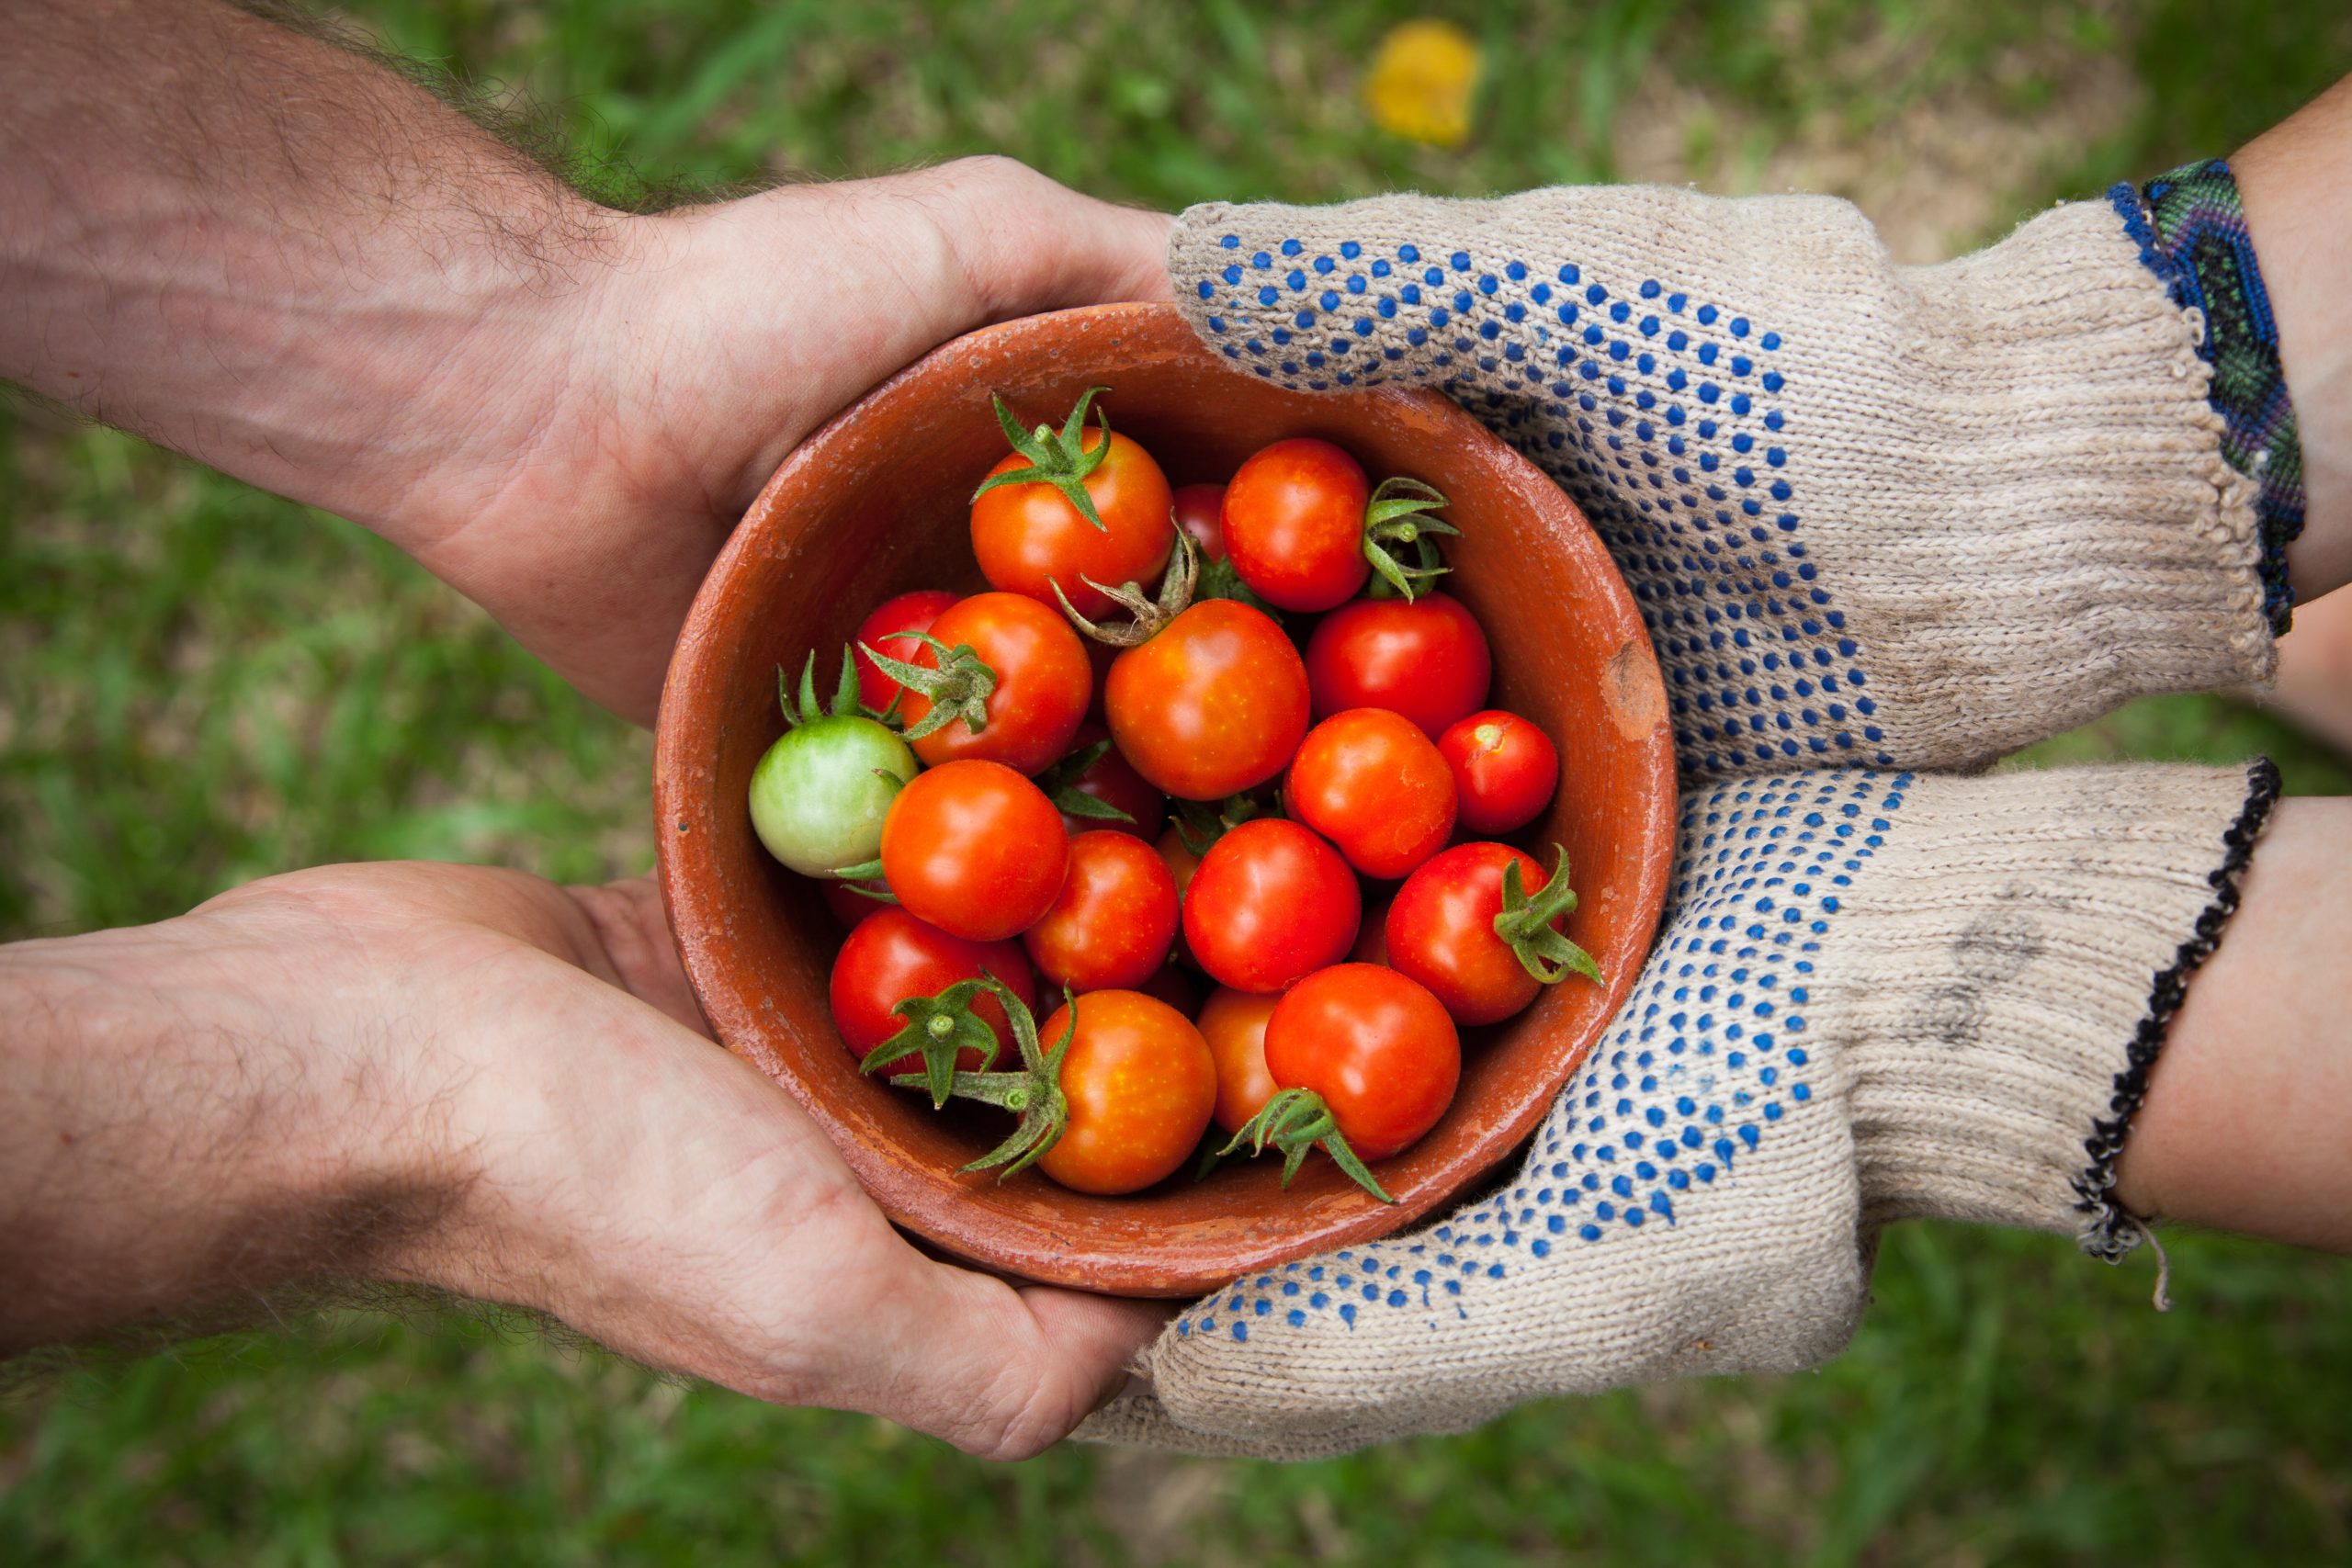 Bowl of tomatoes being handed from the hands of a gardener's gloved hands to someody else's bare hands.